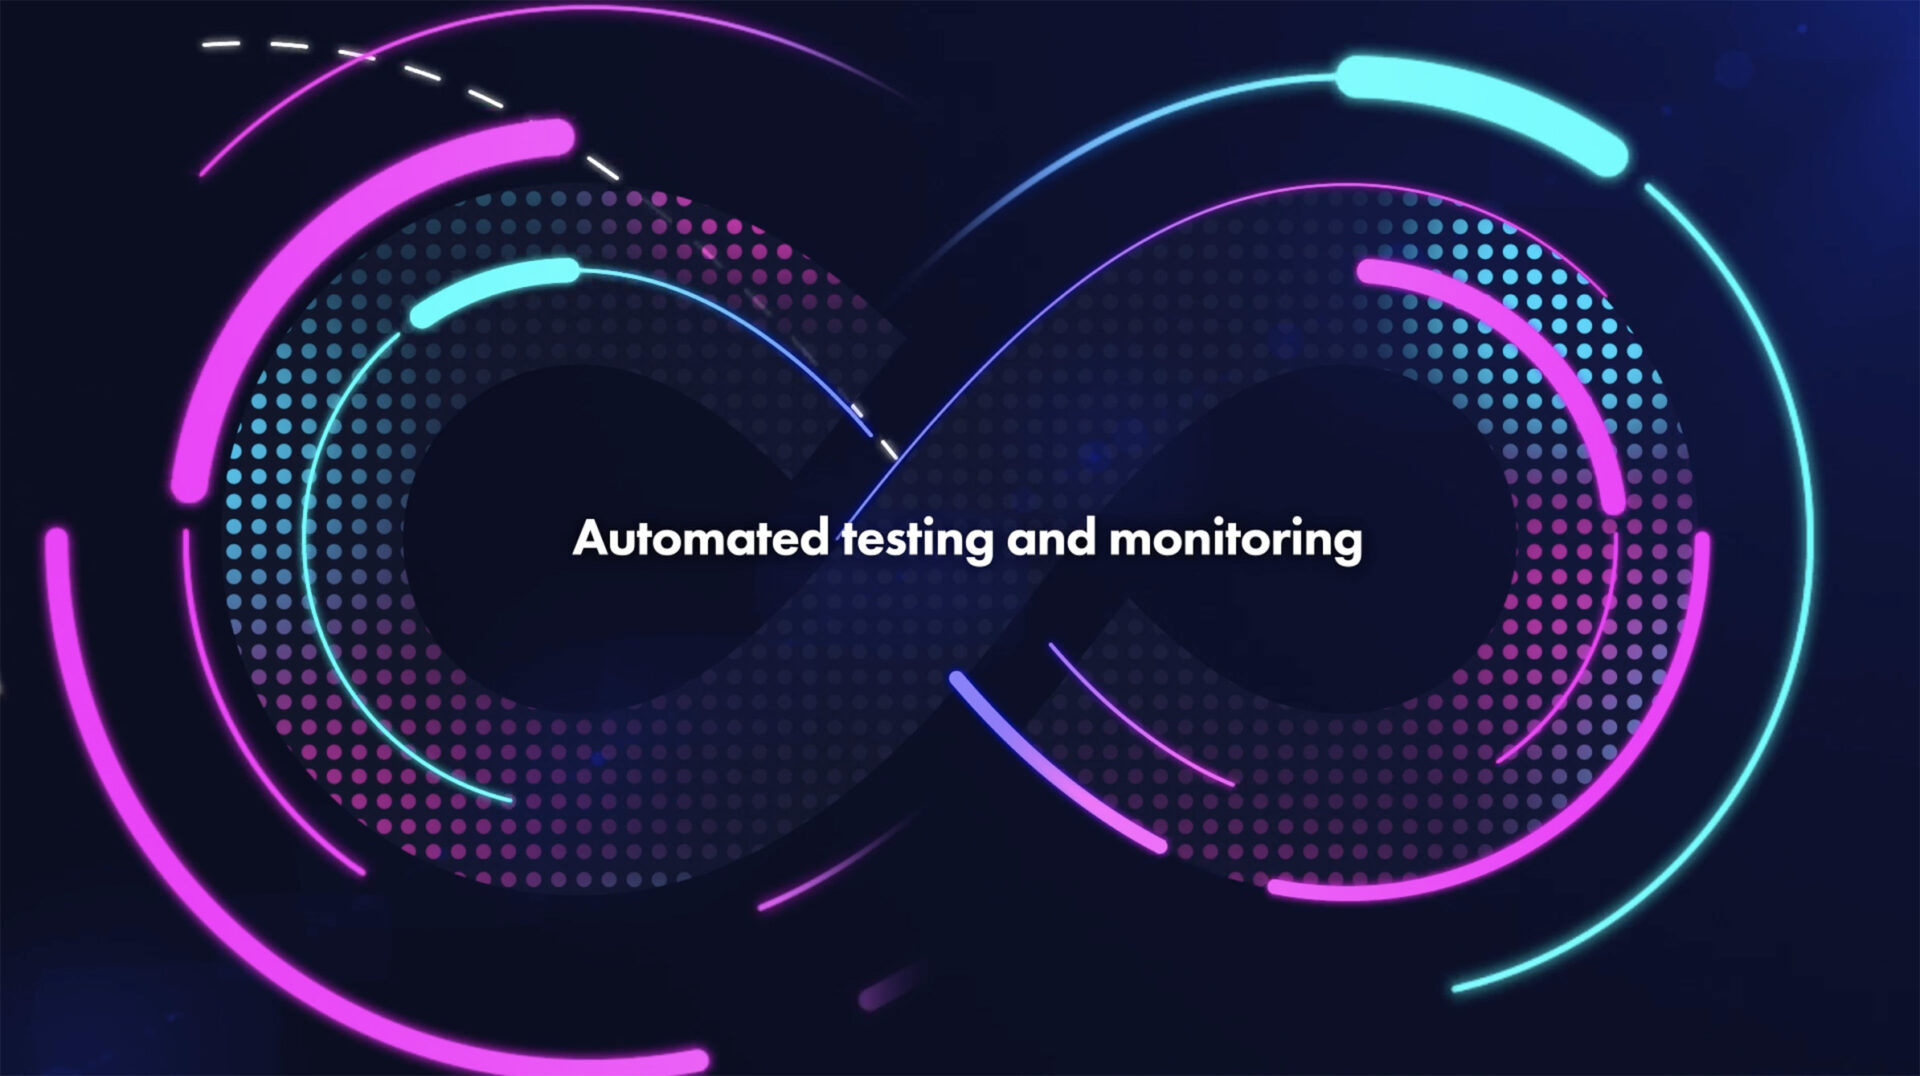 An infinity loop from the Immuta explainer video to show automated testing and monitoring.